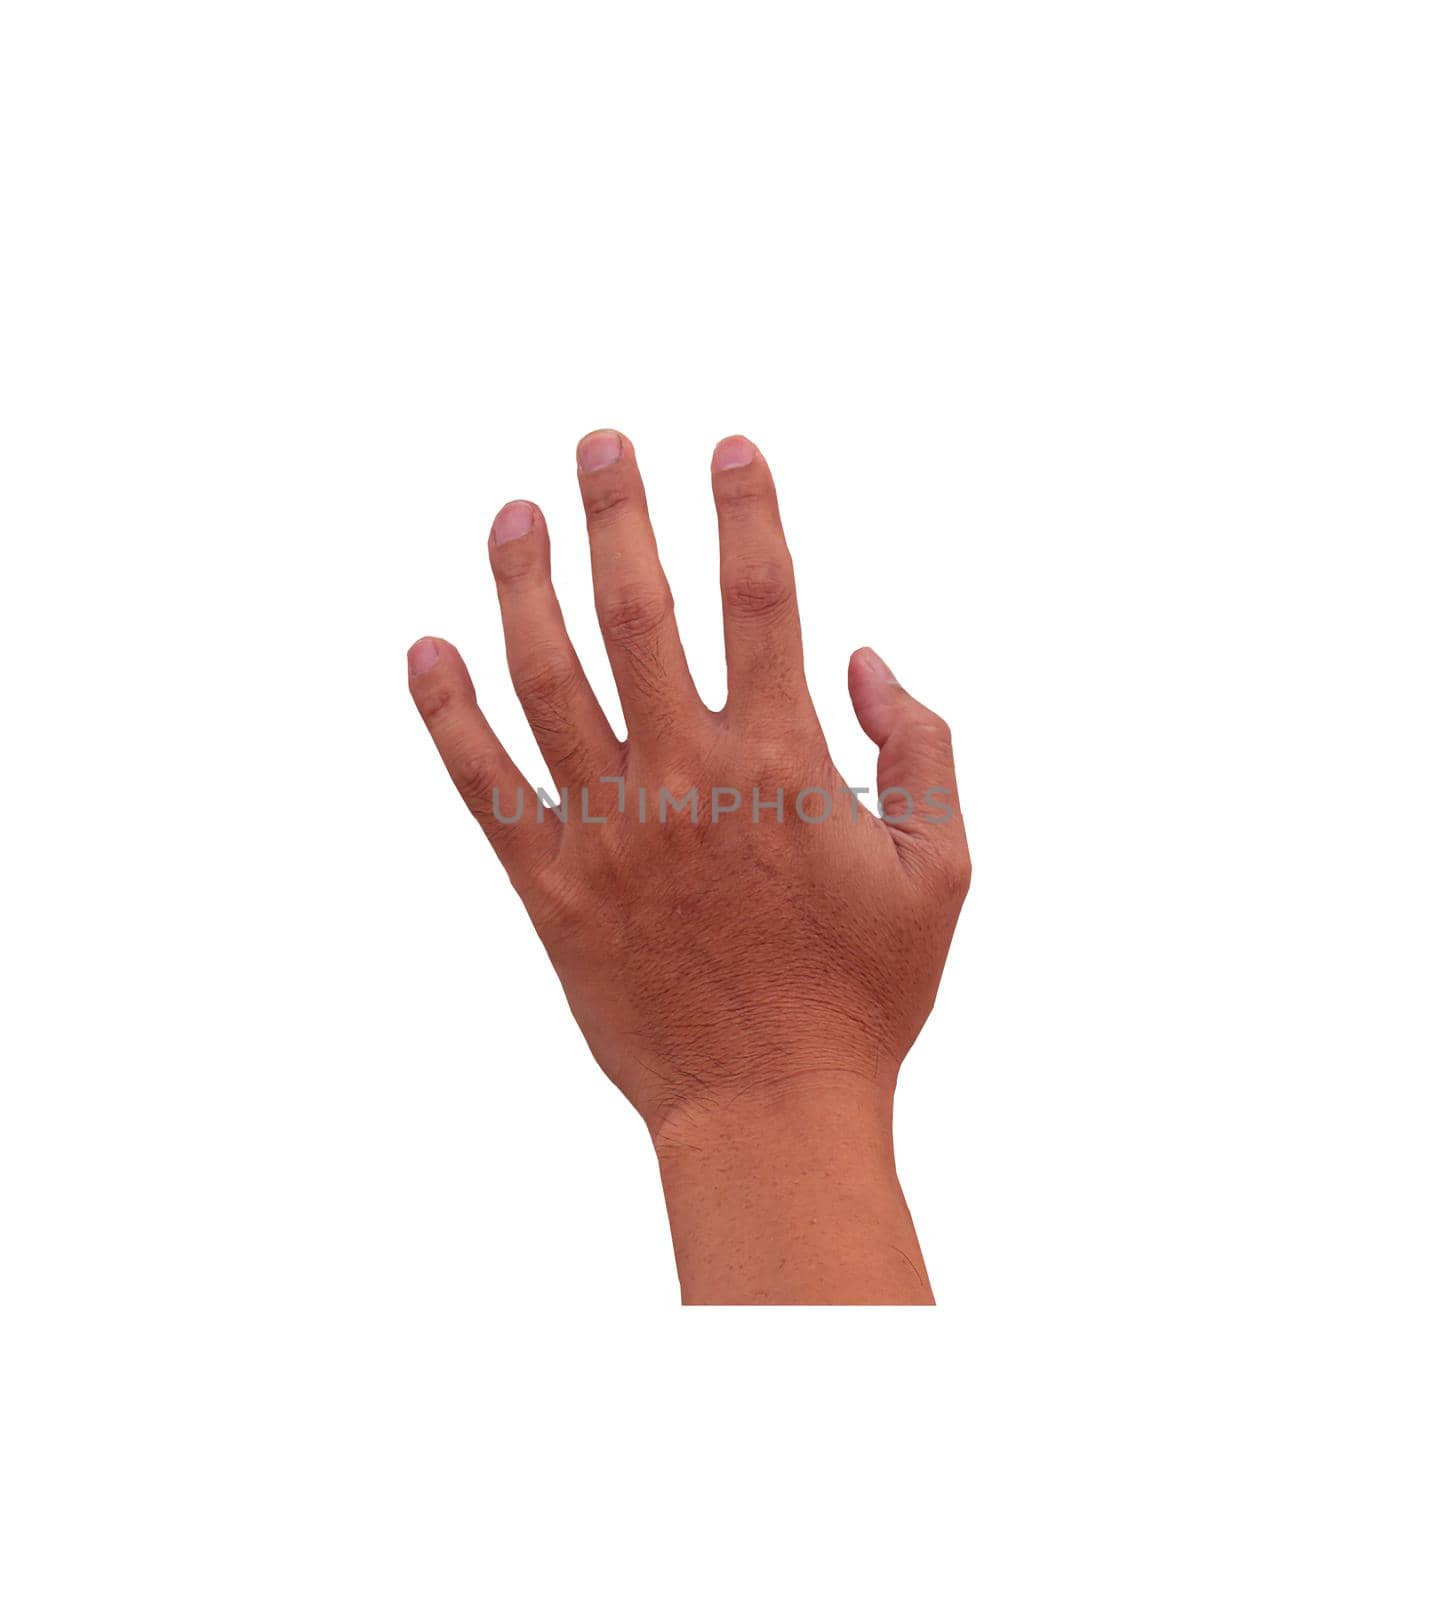 Man hand sign isolated on white background. Human body part represent abstract handcraft. by Petrichor